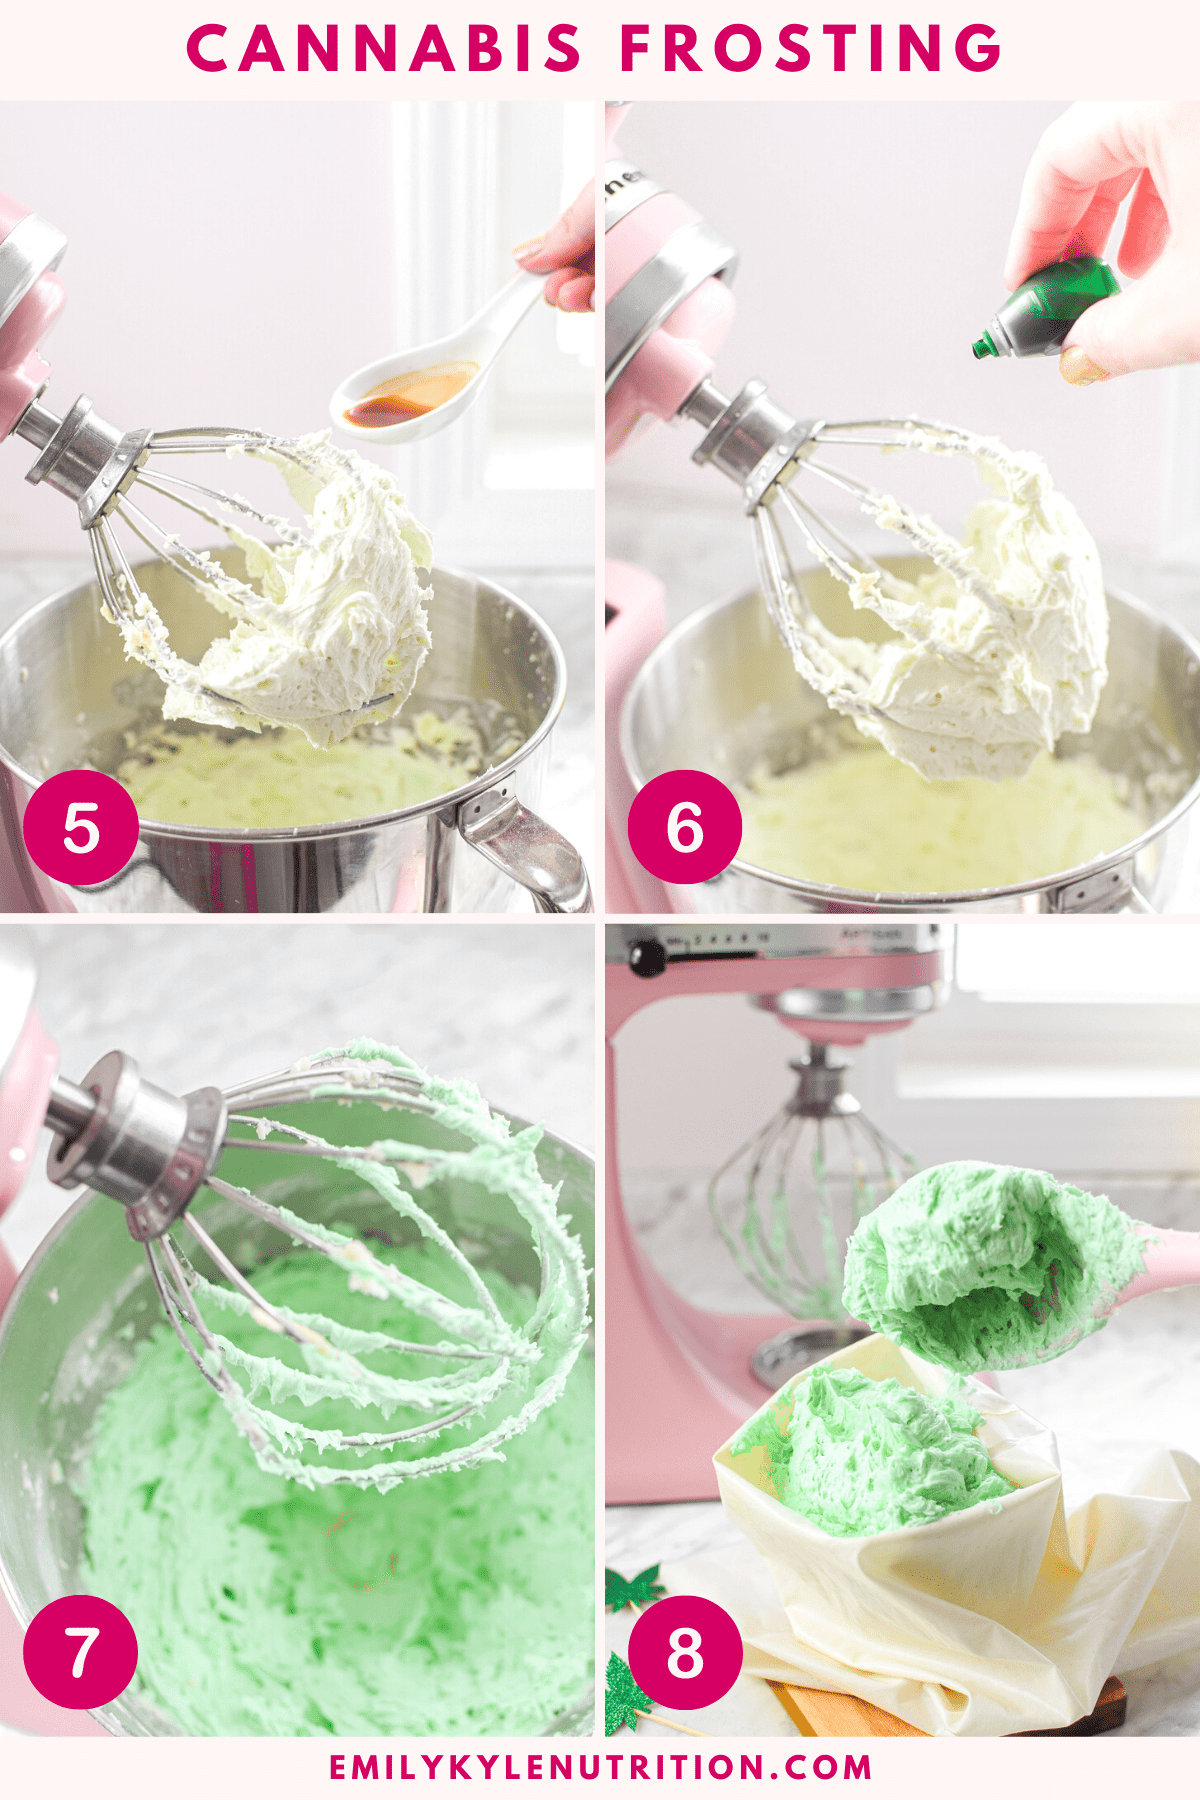 A four step image collage showing last first four steps needed to make cannabis buttercream frosting